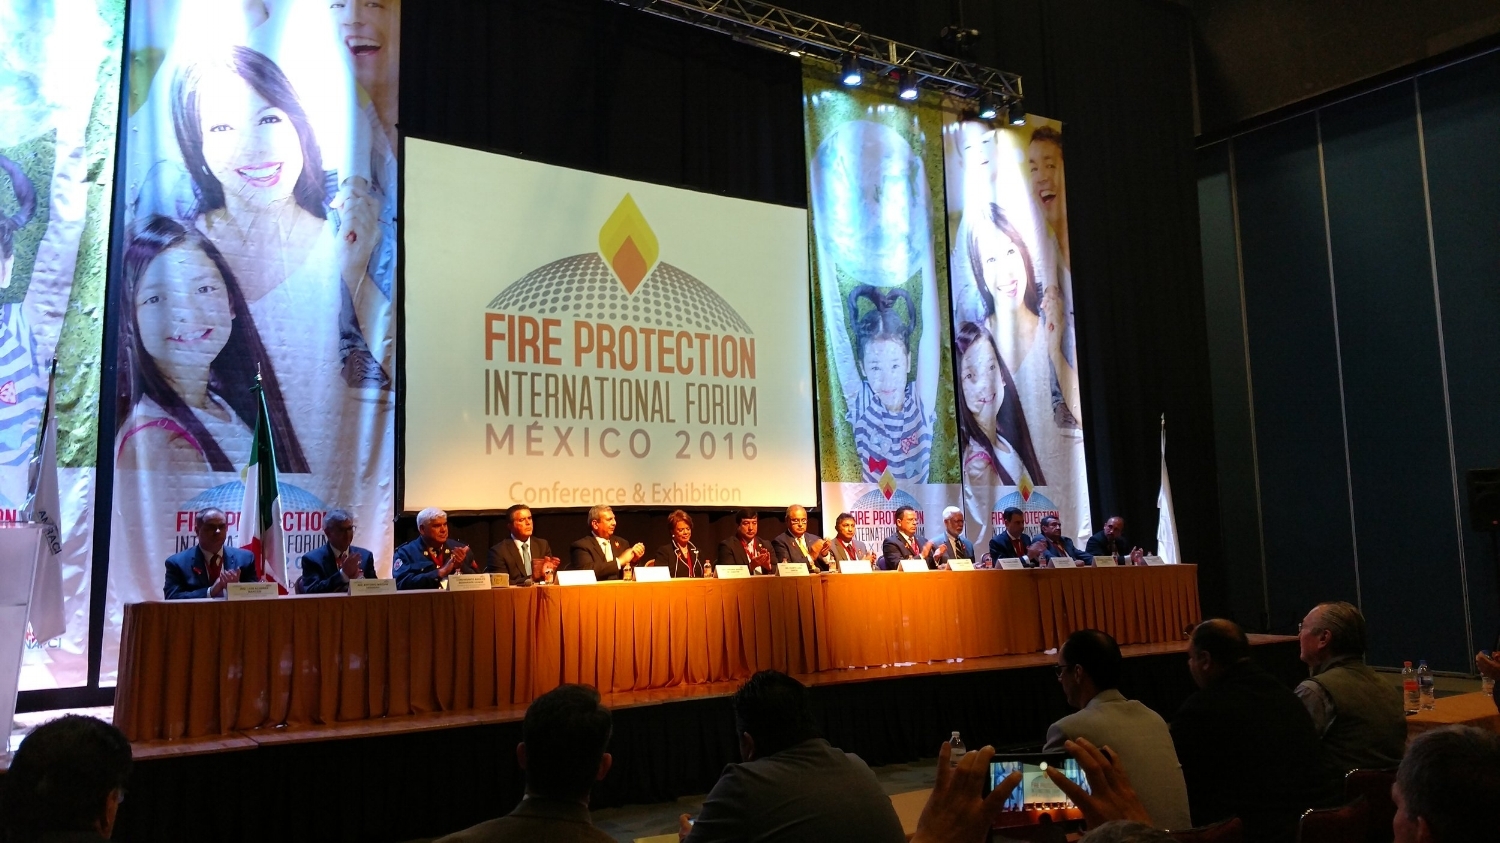 Dais at opening of International Fire protection forum in mexico city